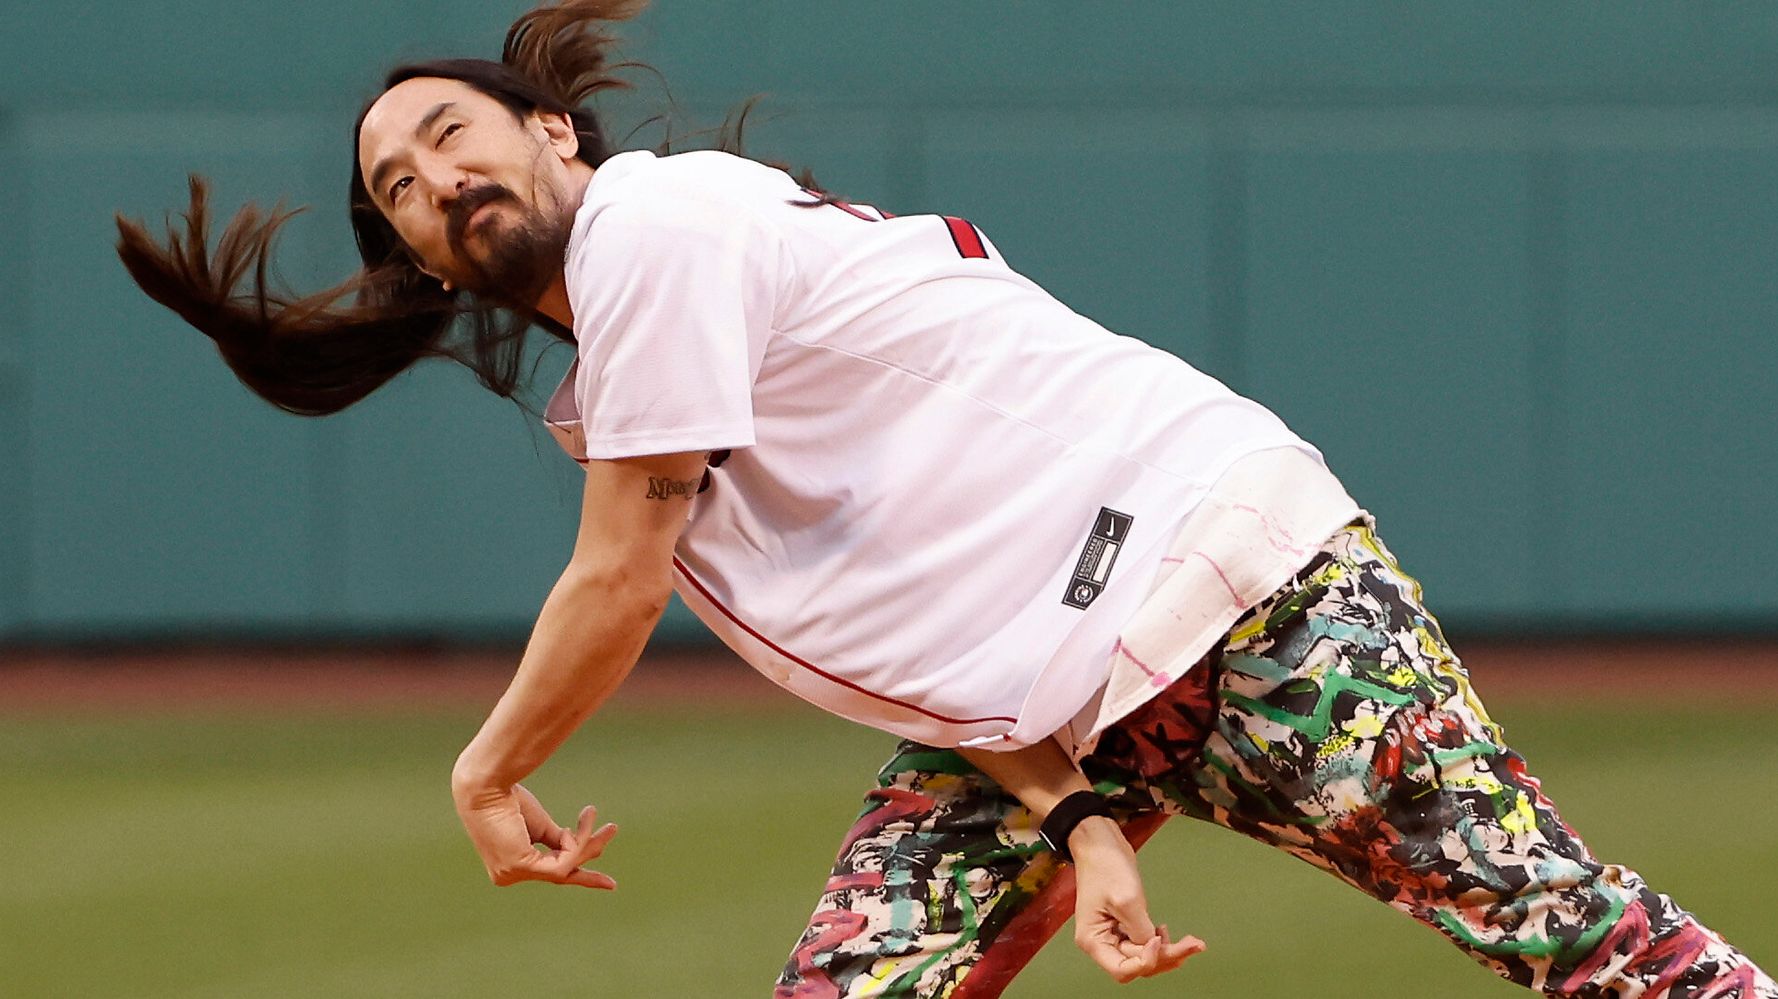 Steve Aoki Shows How NOT To Throw A First Pitch: ‘Didn’t Work Out For Me’